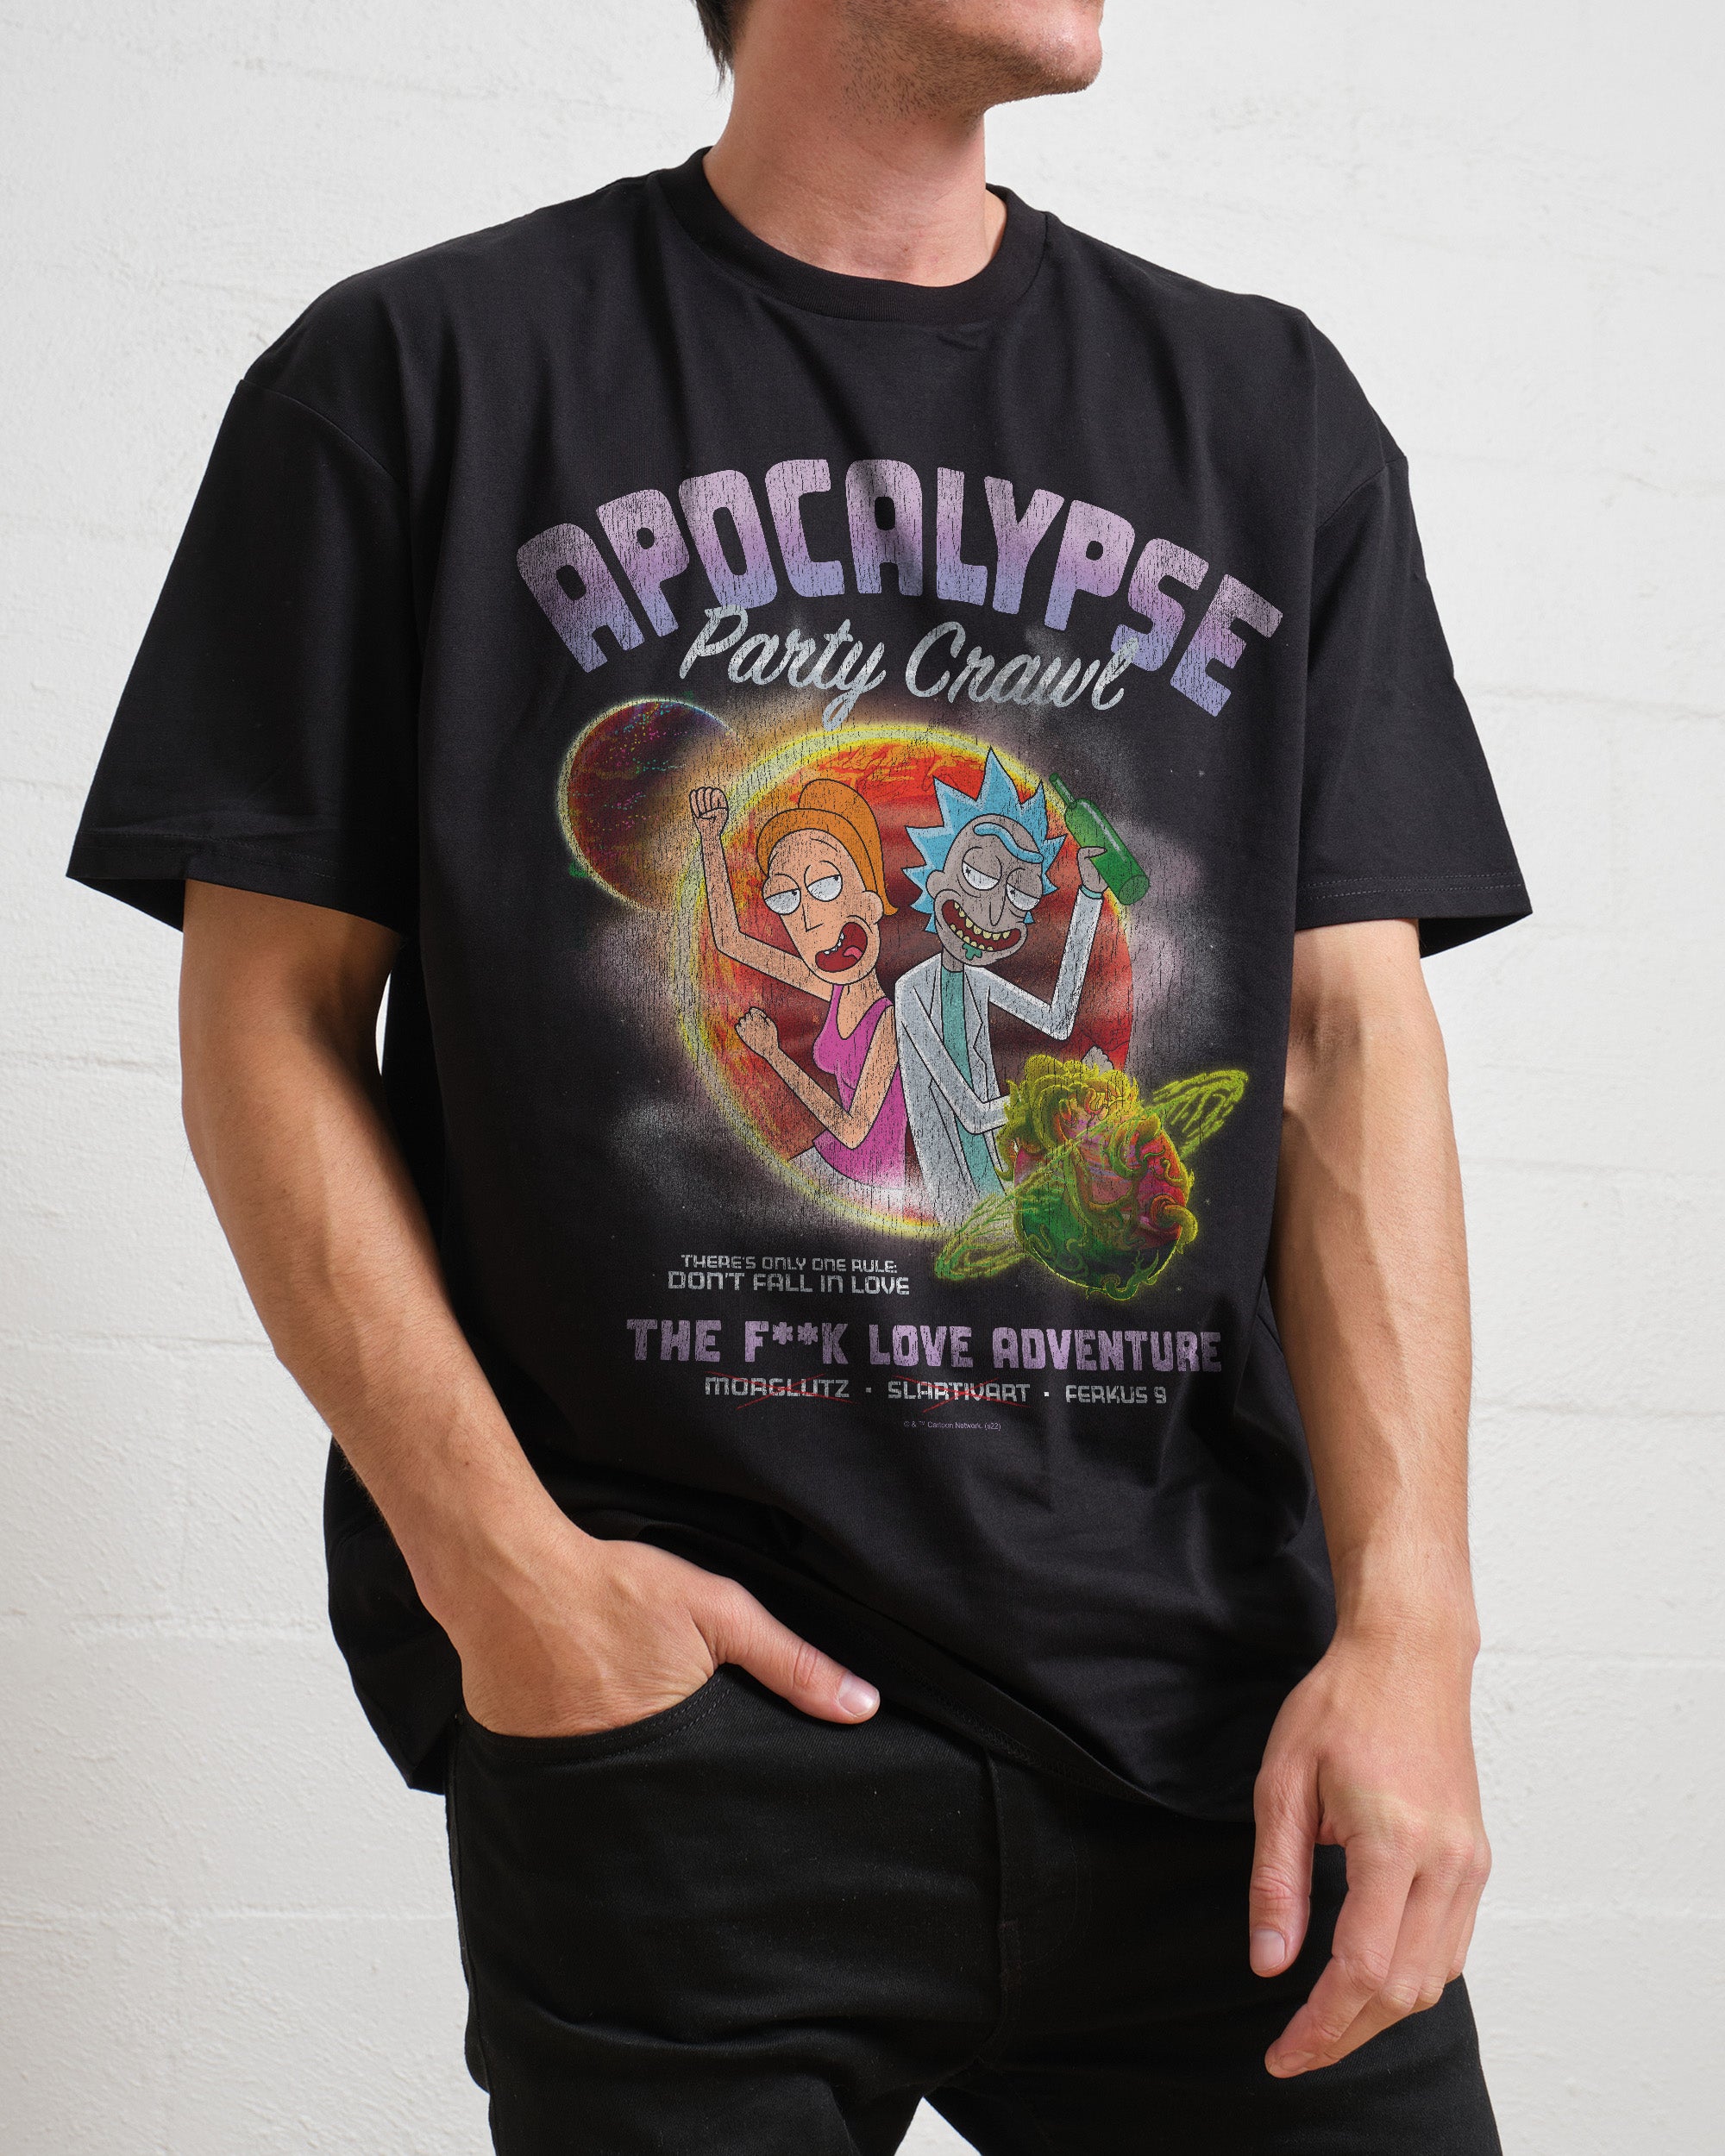 Rick and Morty - Apocalypse Party Crawl T-Shirt